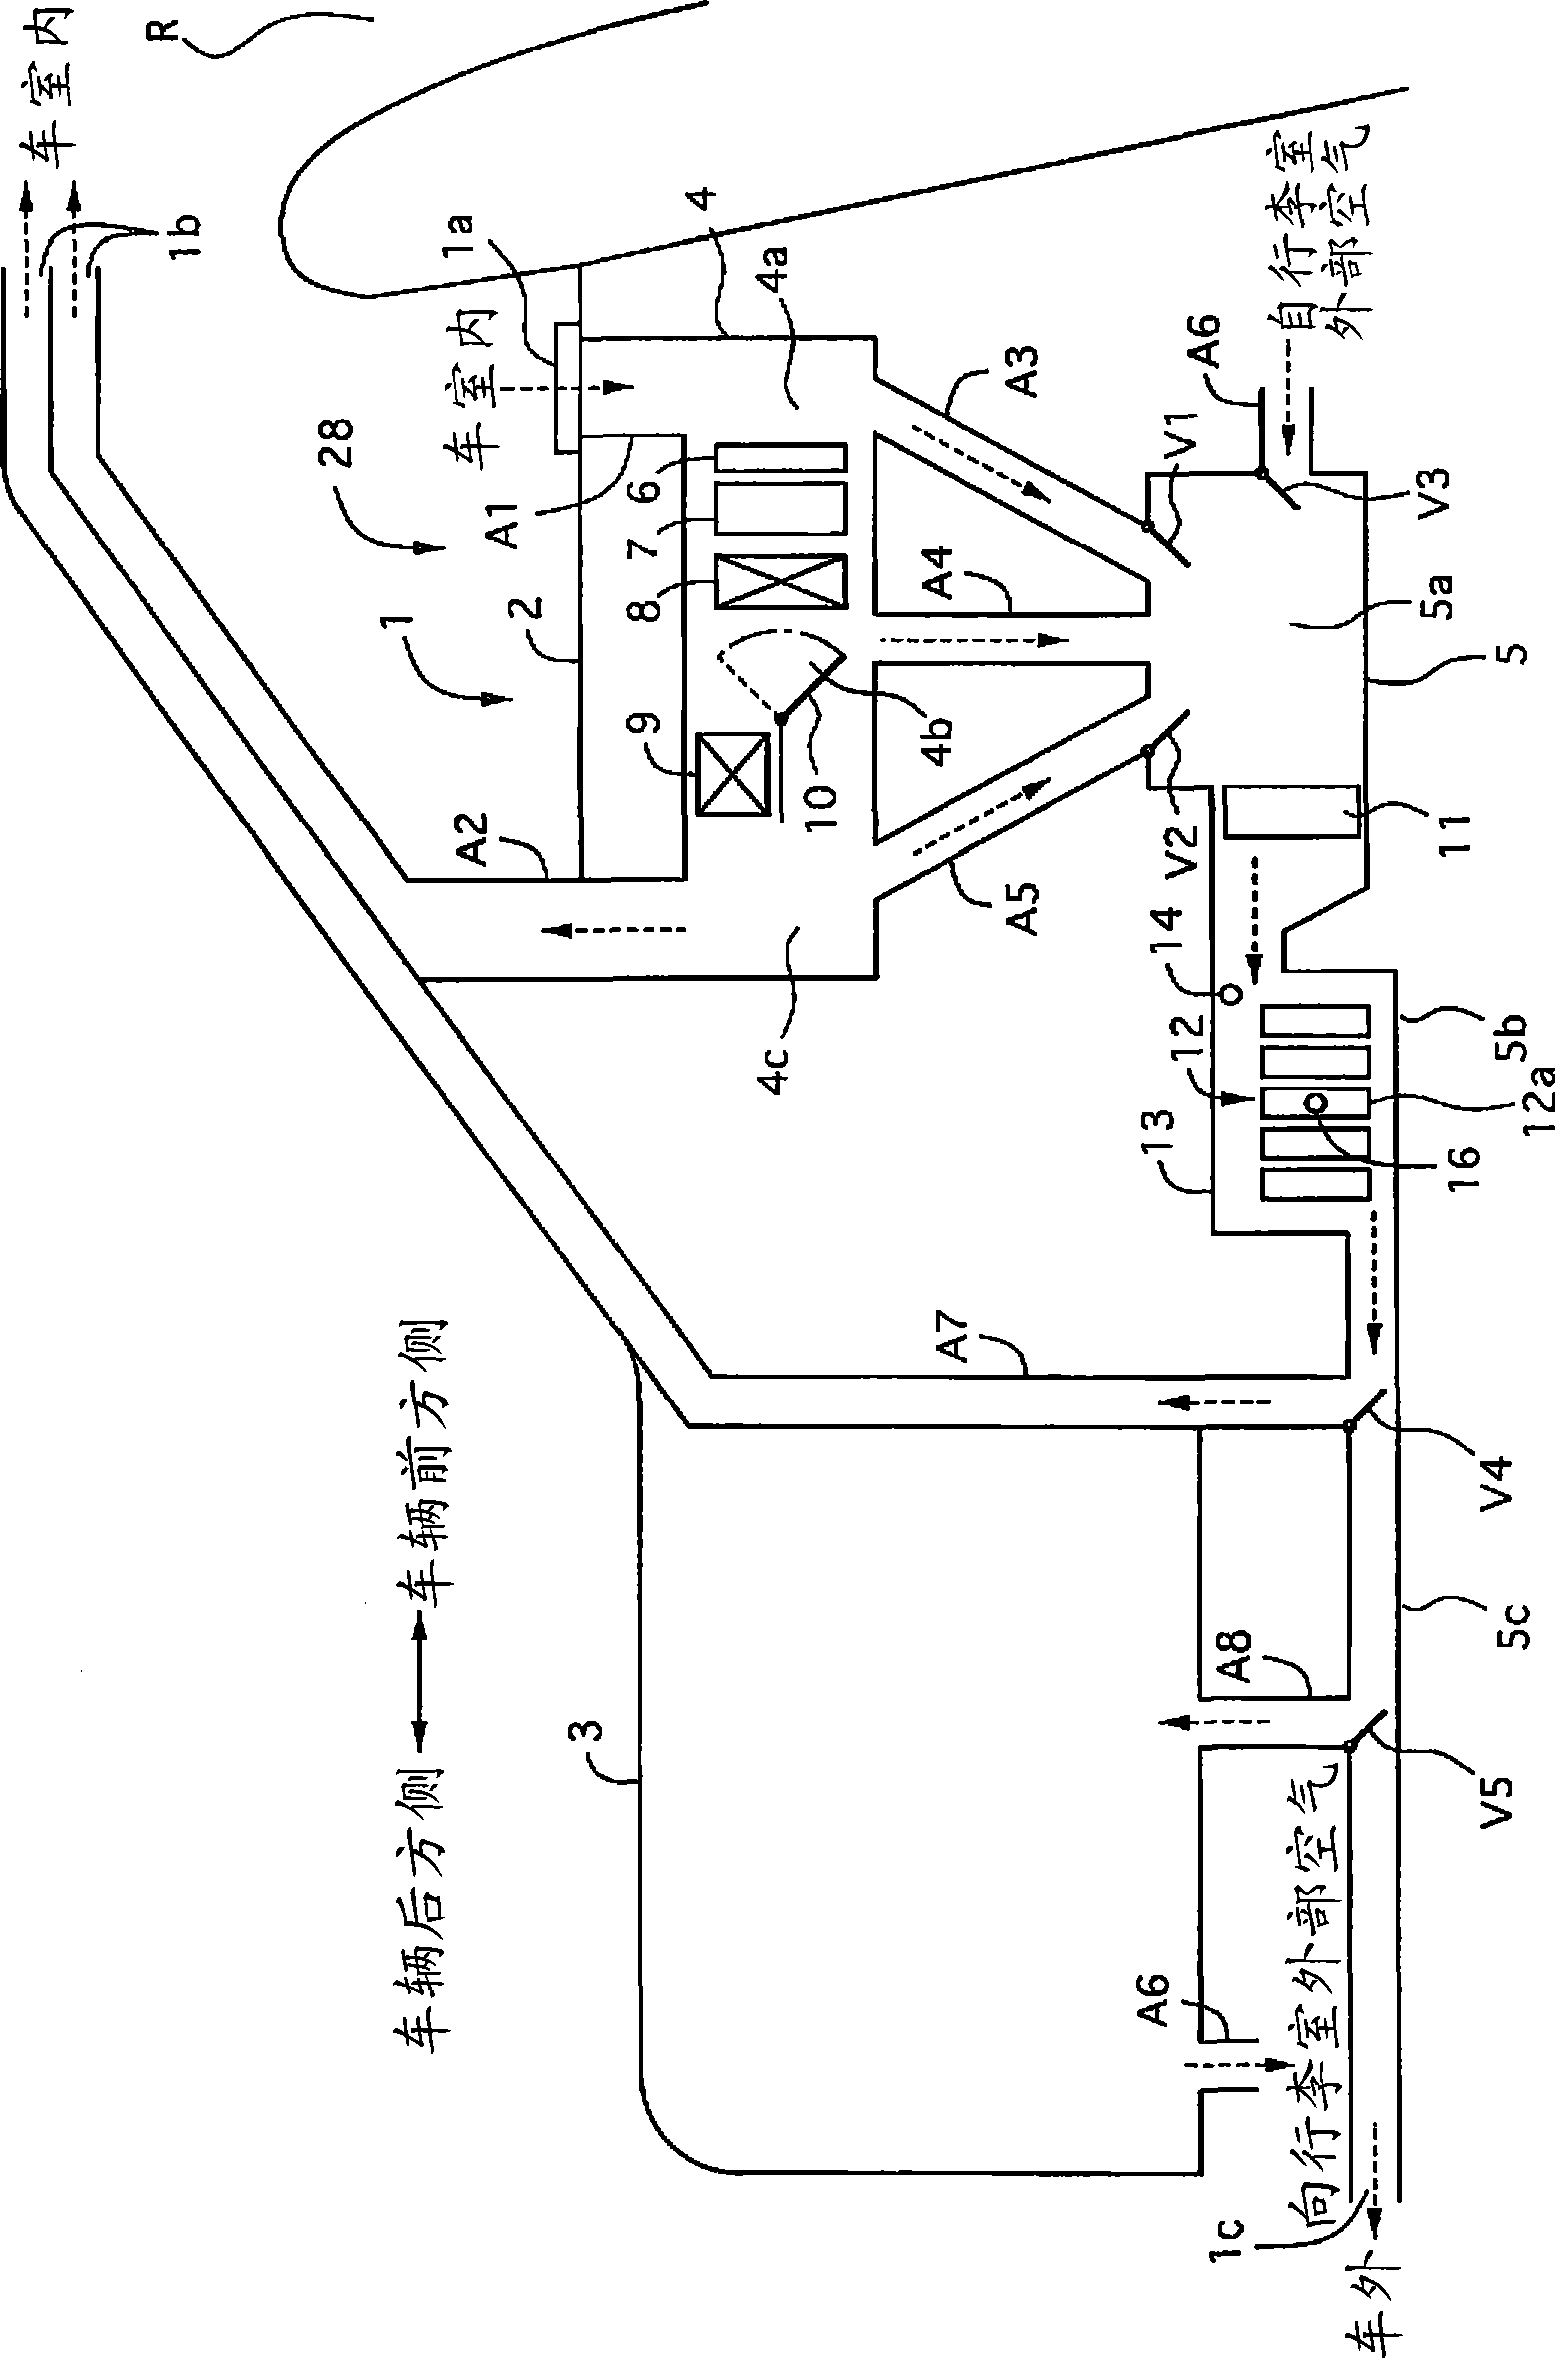 Battery temperature control device of vehicle